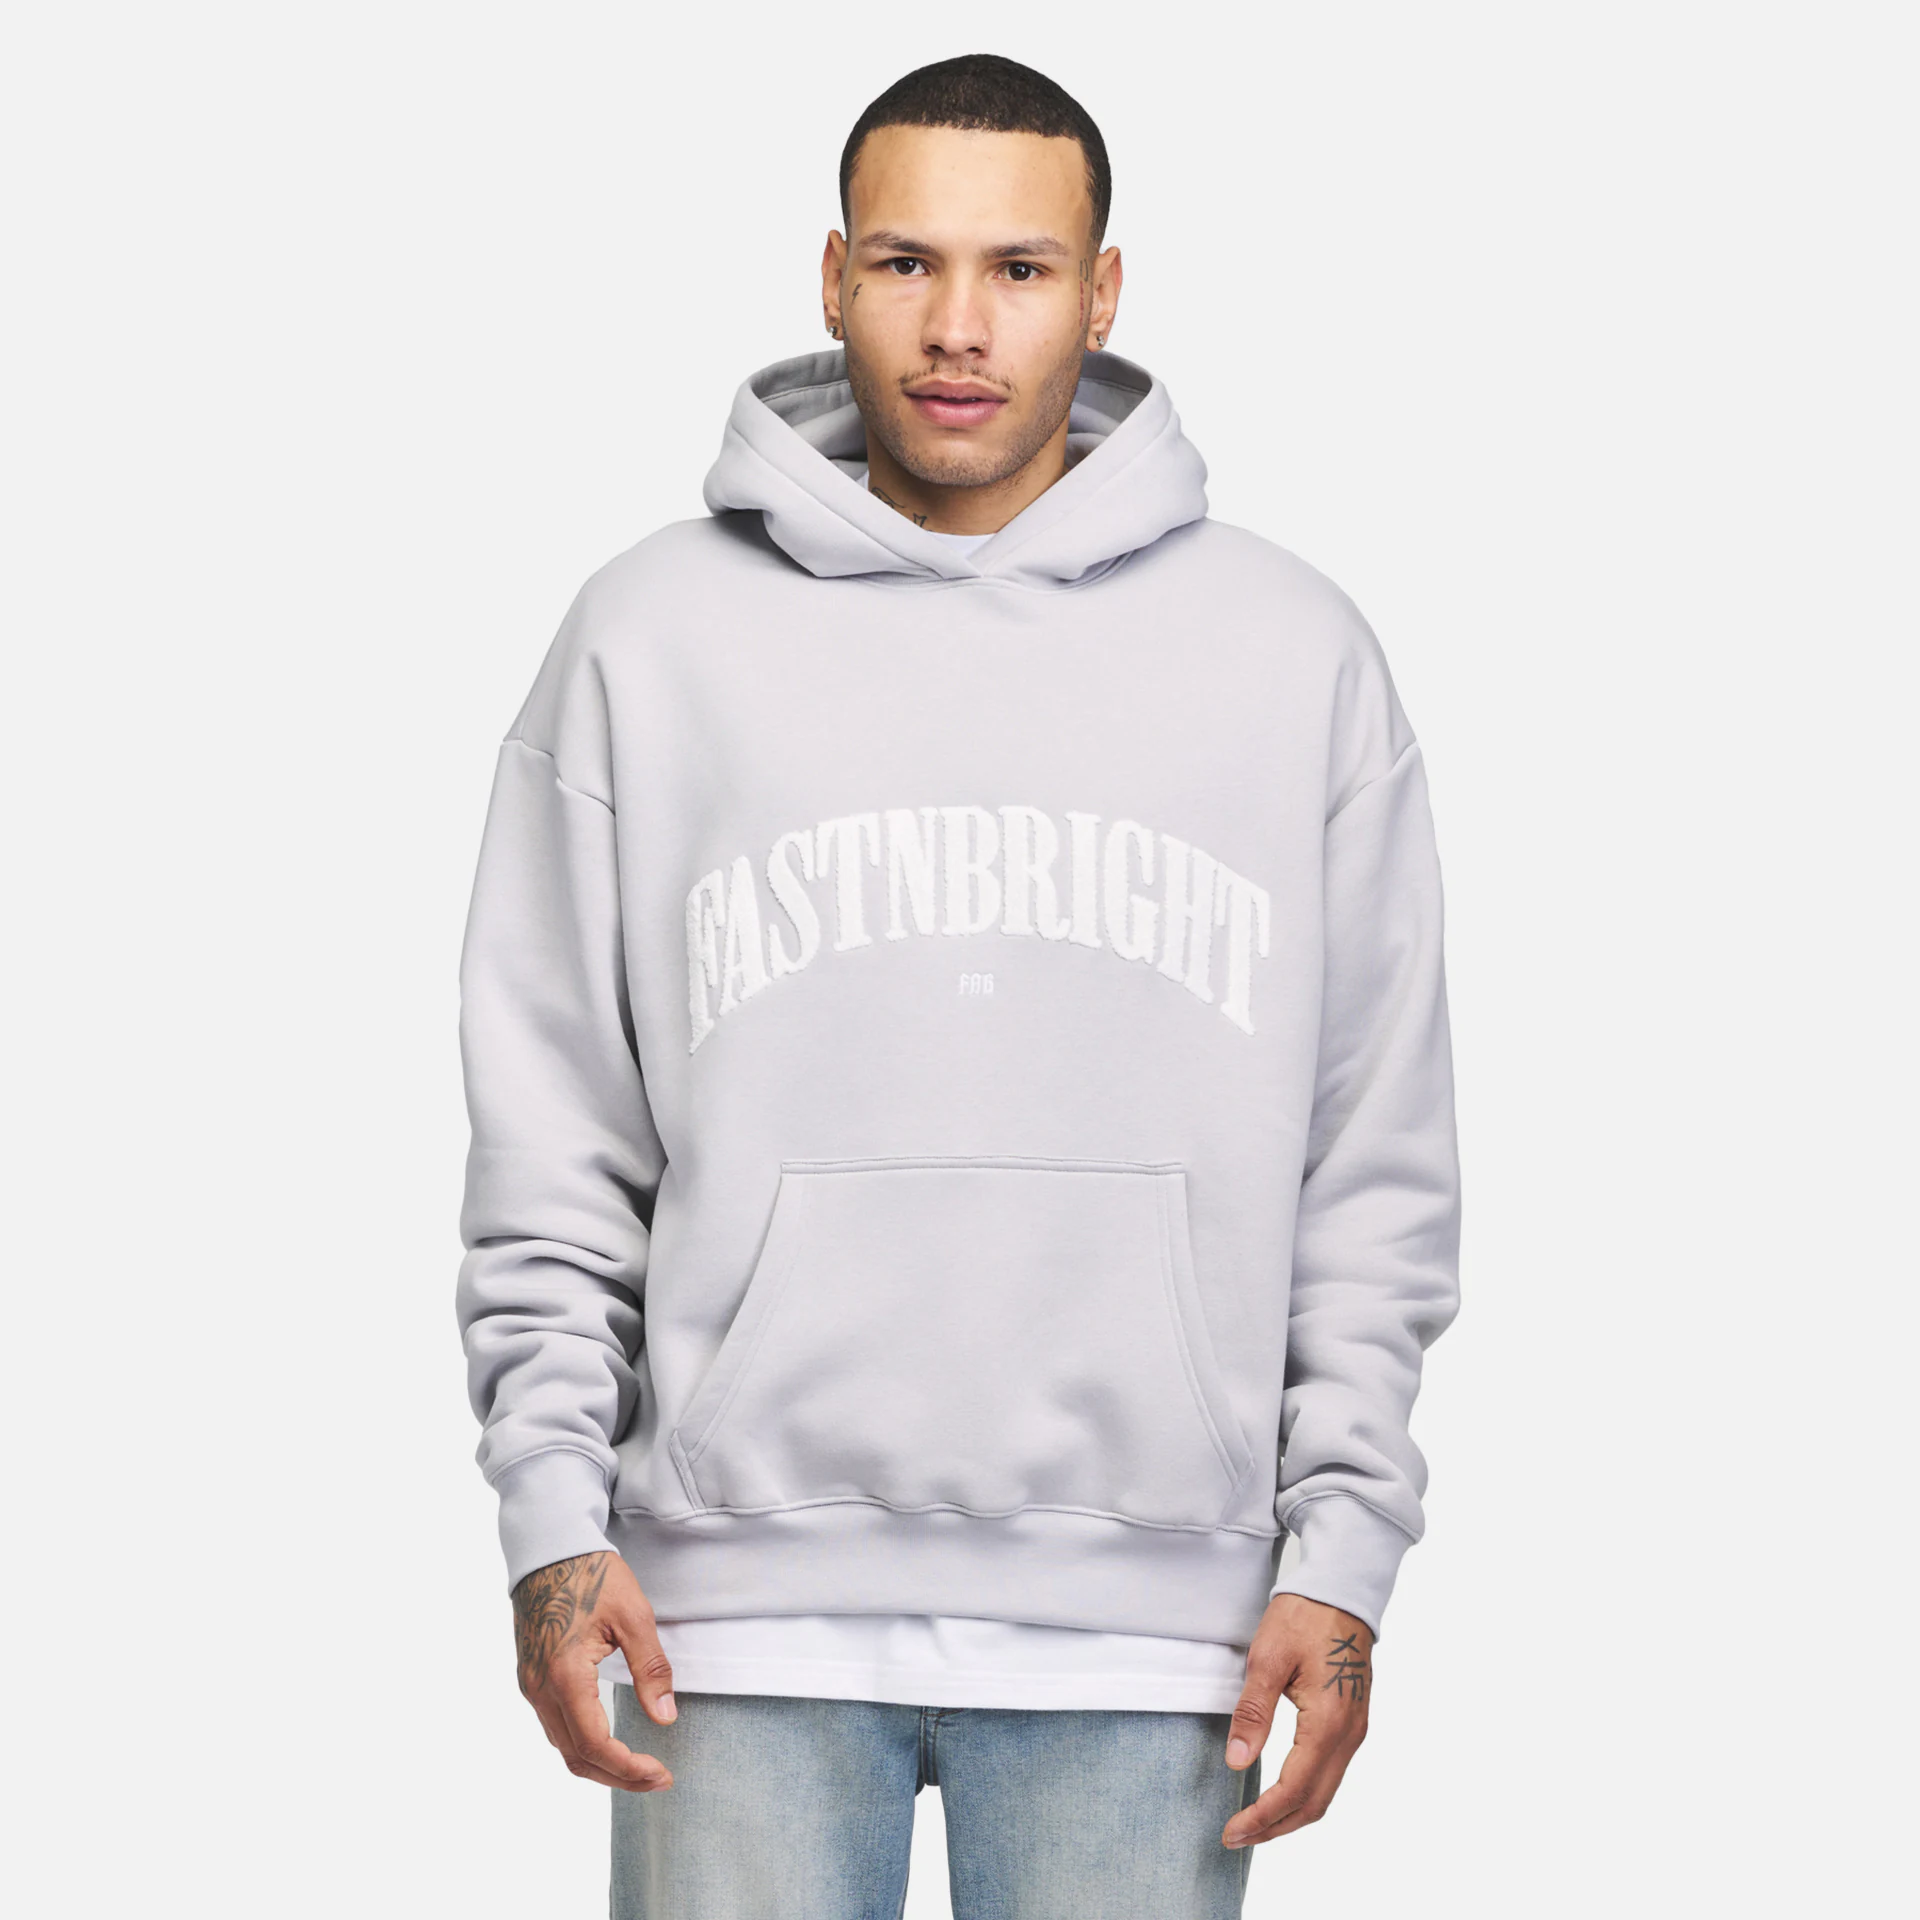 Fast and Bright FAB Hoodie Grey